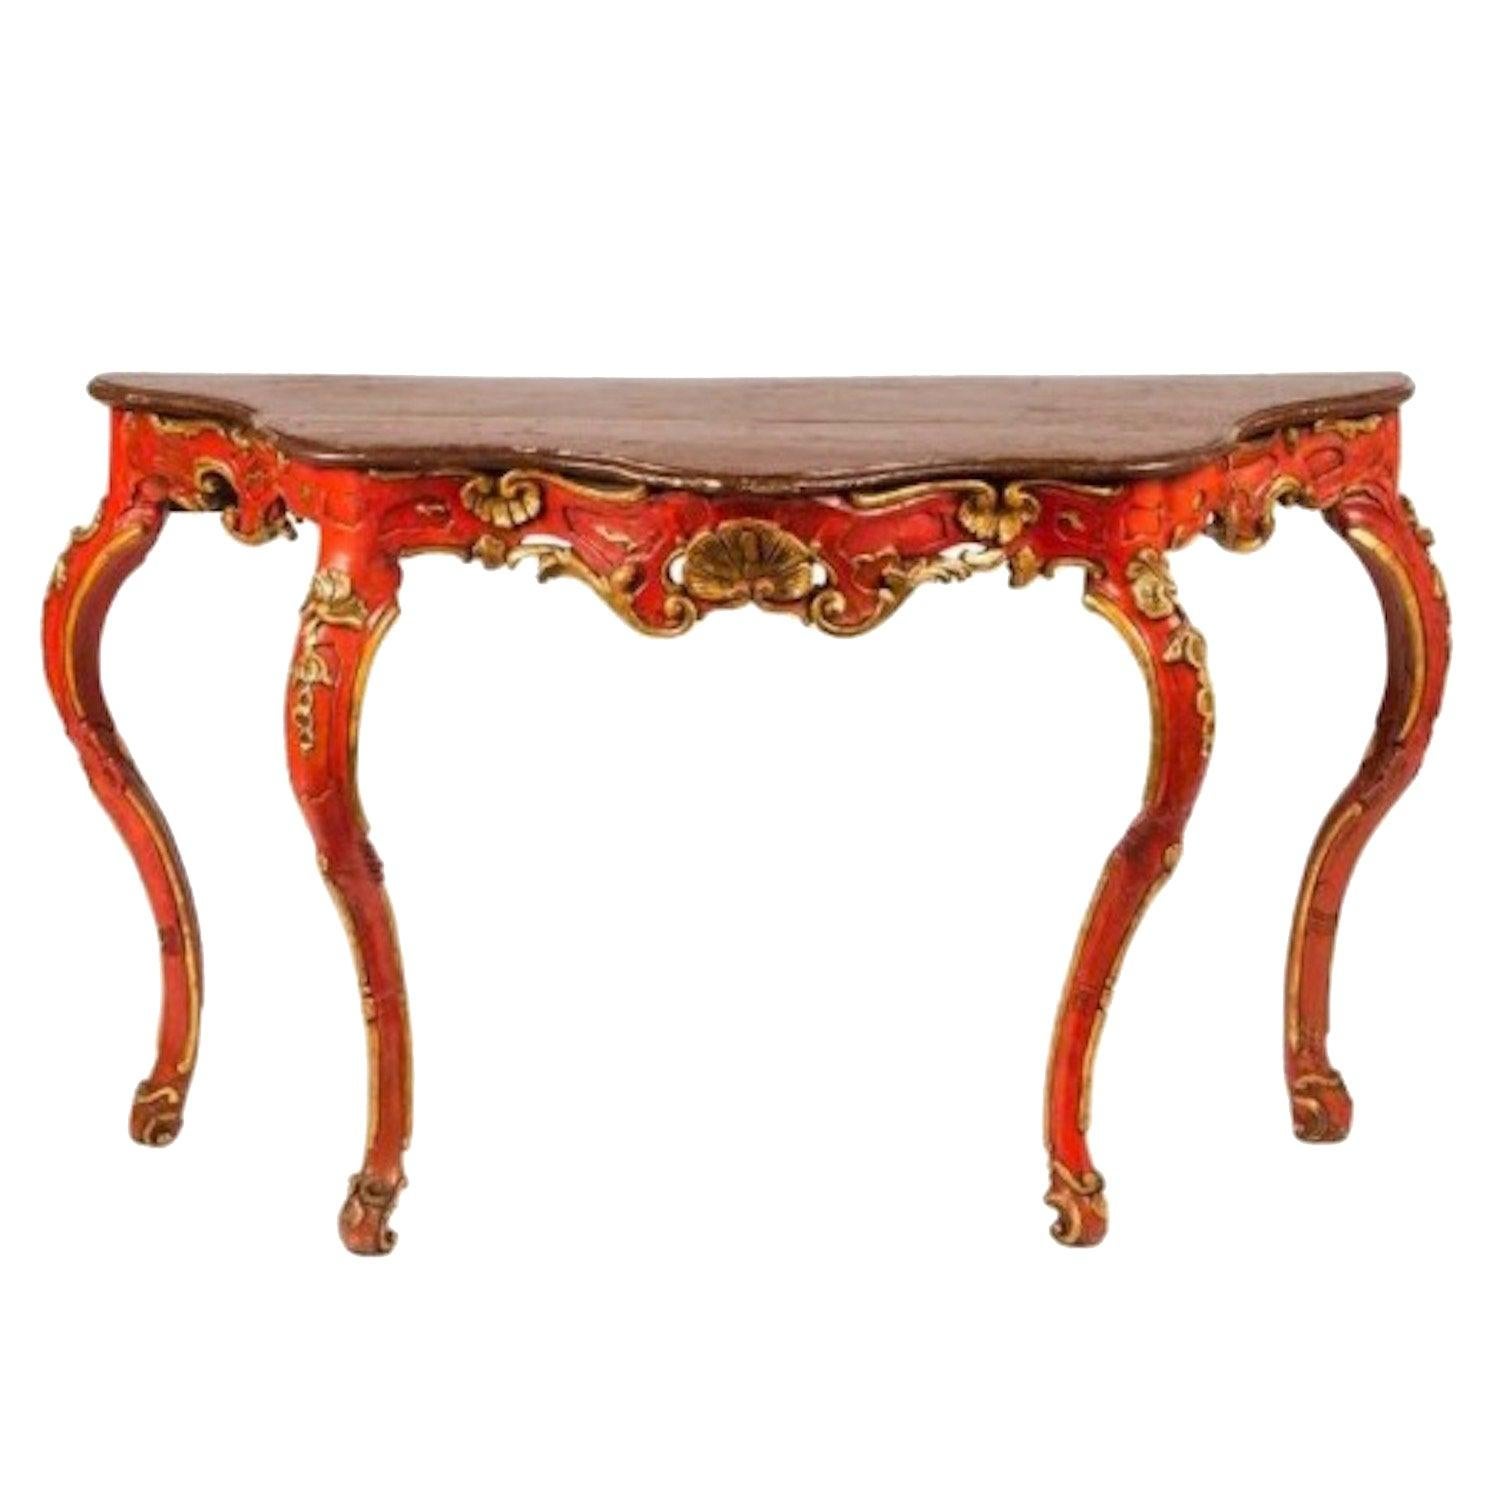 18th century venetian red painted parcel-gilt serpentine console table. Boldly delicate, this console is a showstopper in any room. The red and parcel-gilt finish is unique. Unpainted original wood top. Perfect in an entryway or living area to hold